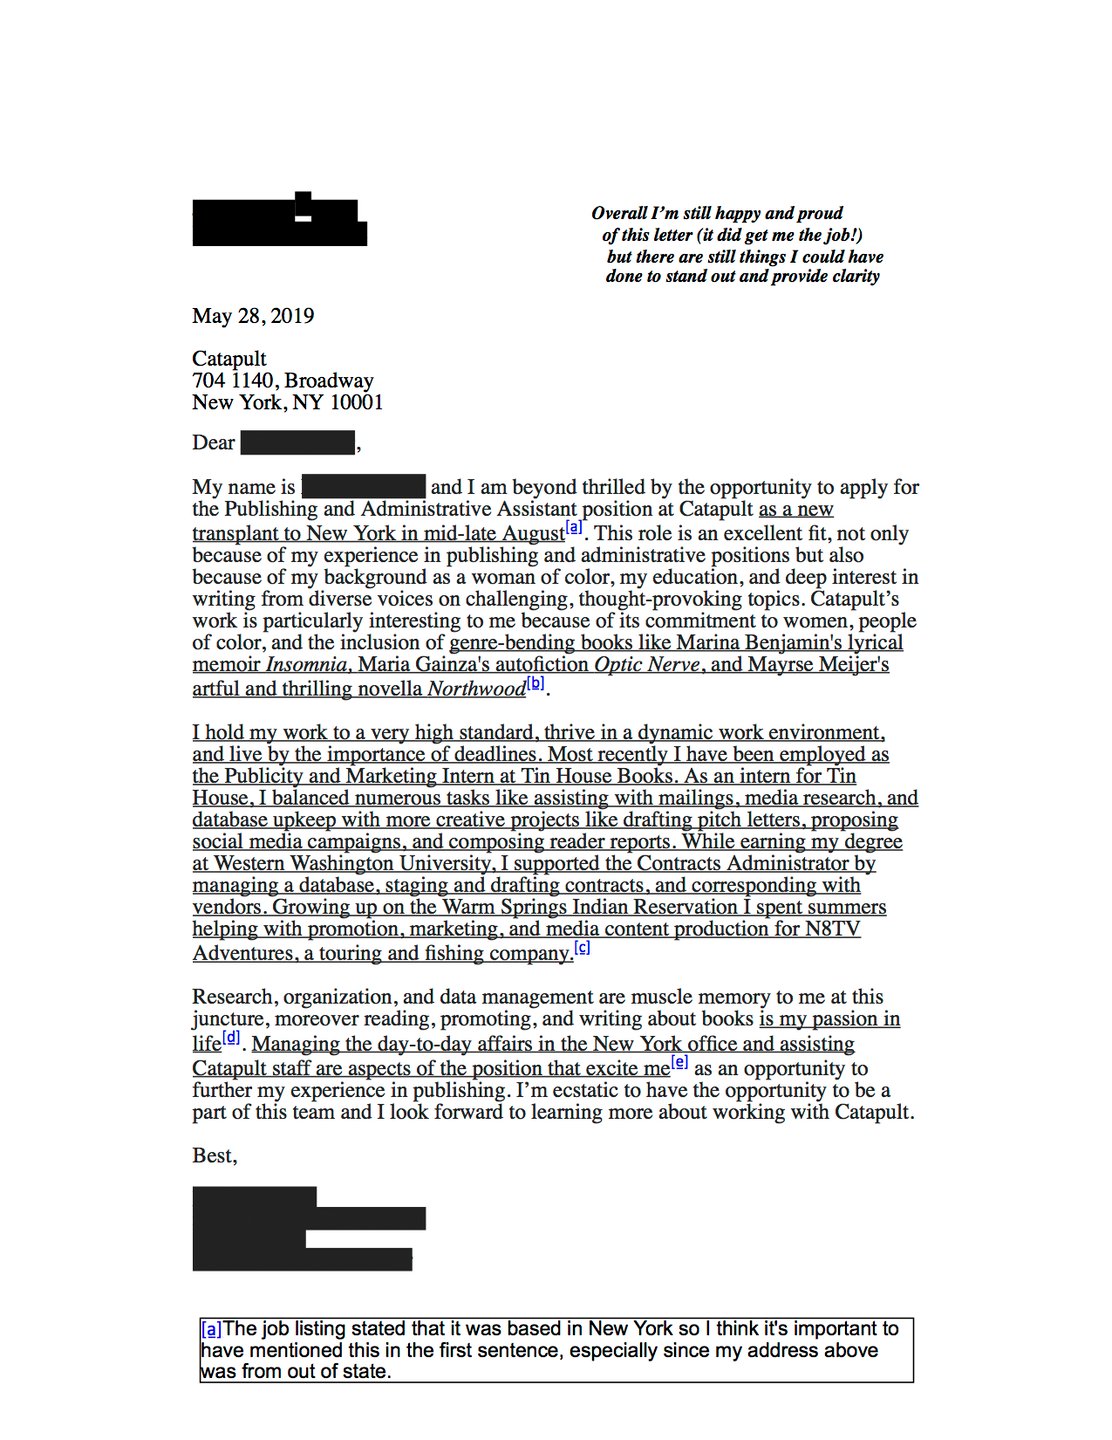 This cover letter was used to apply for a publishing and administrative position at Catapult. The author notes in typed annotations that while this cover letter did end up getting them the job, there are some things they felt could have been written more clearly. In particular, they flag that instead of sharing general familiarity with Catapult's book list, they could have picked one title to dive into more deeply and share a connection with. Additionally, they felt that a line at the end of the cover letter, which reads that books are the author's passion is very general and commonly expressed and they could have done a better job to be more creative and specific to themselves.